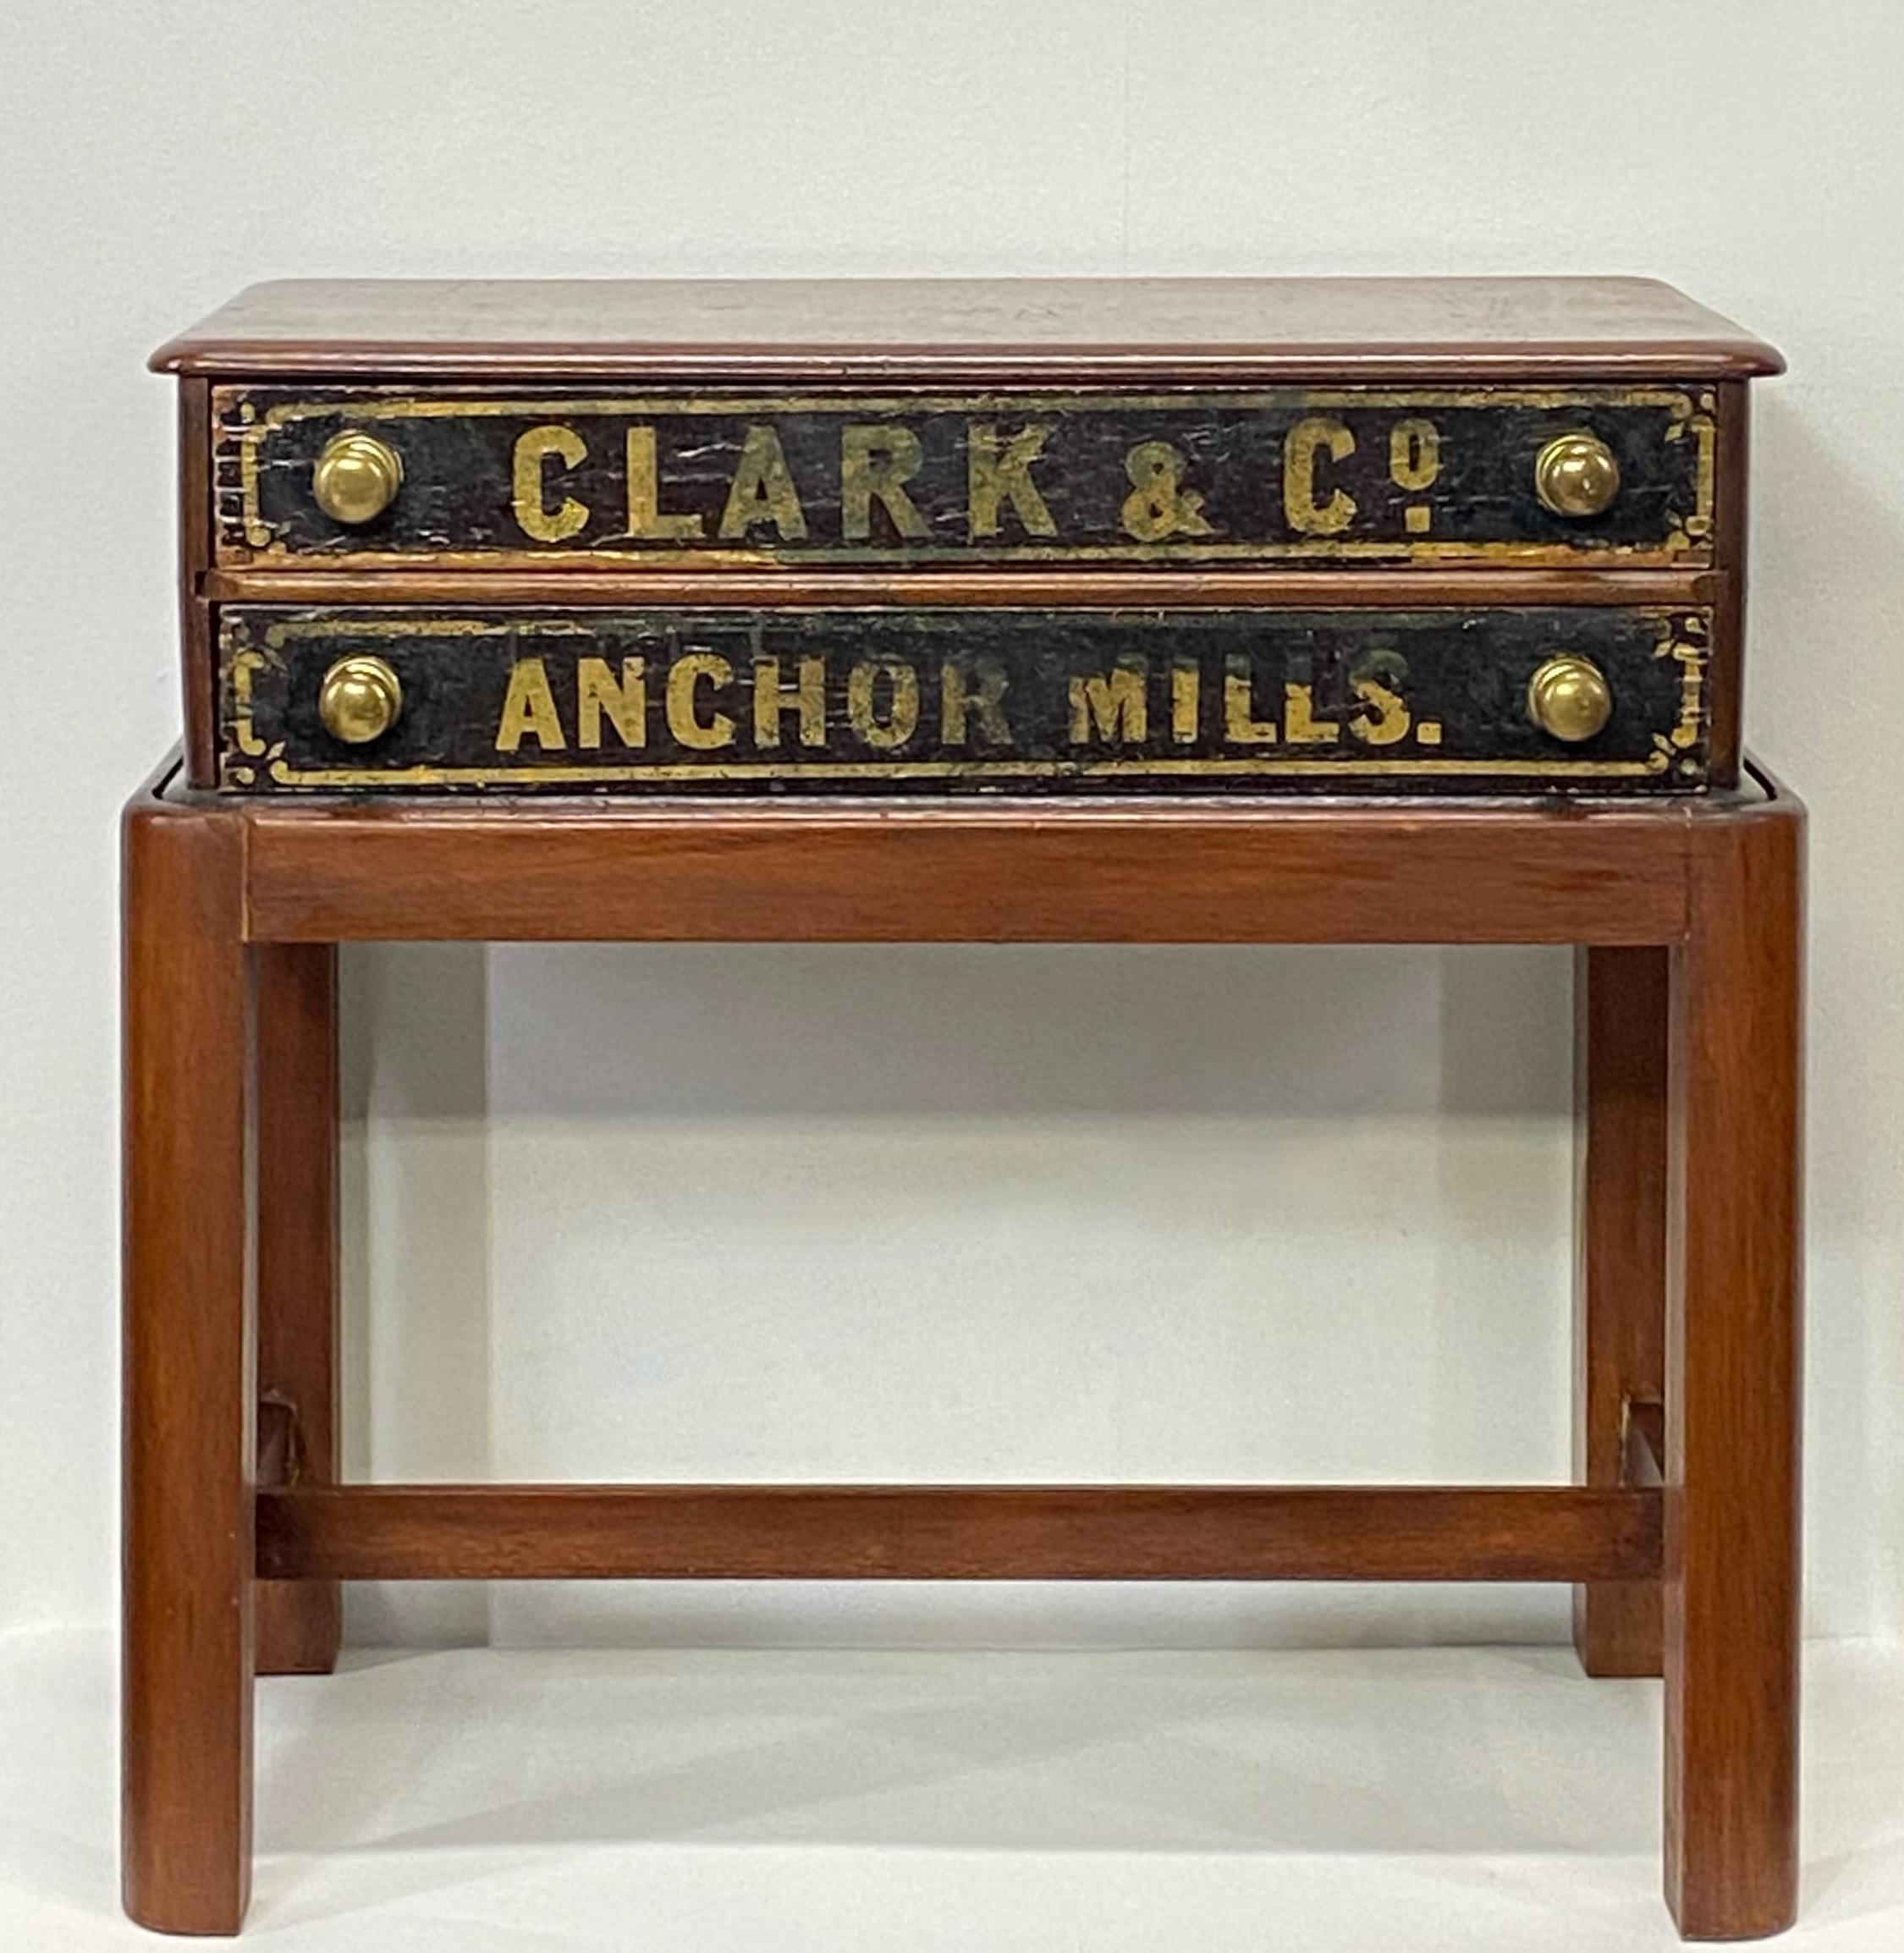 An antique clarks Thread Co. advertising walnut spool cabinet with gilt lettering, on later (1970's) custom made mahogany stand. Made to use as a side table.
American, late 19th century.

